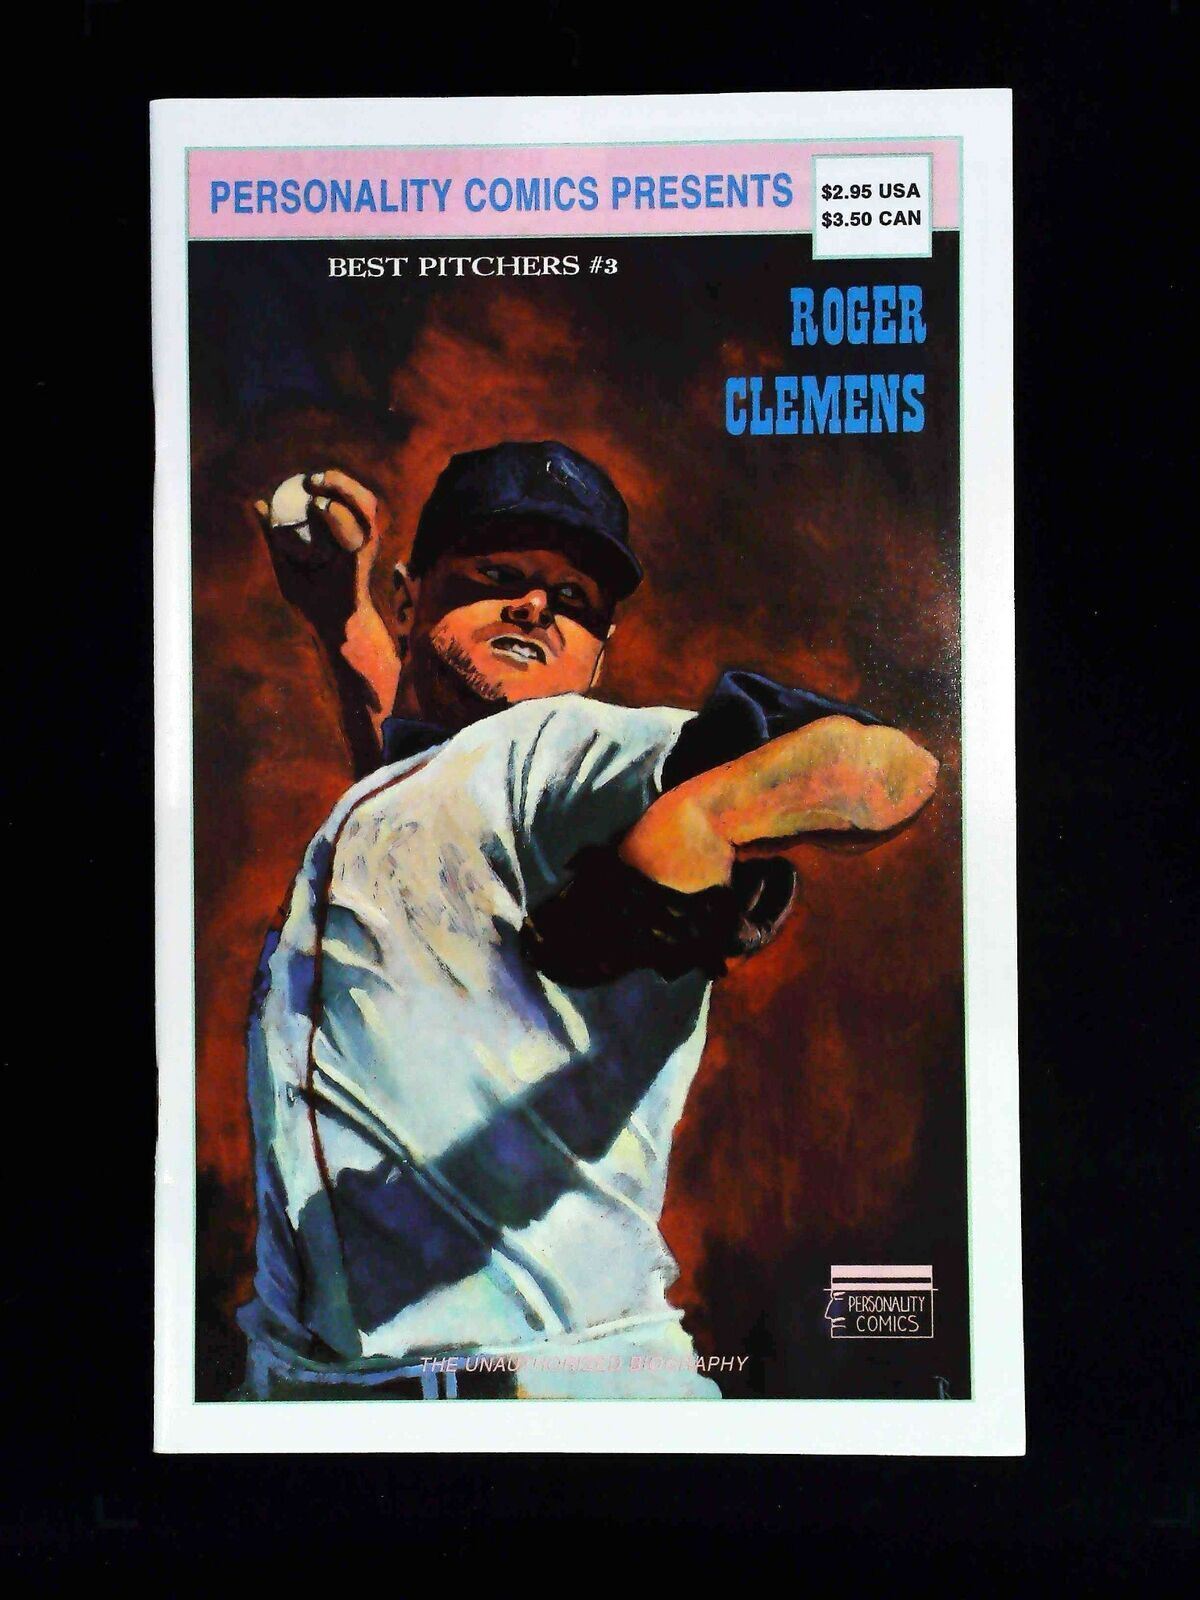 Best Pitcher #3  Personality Comics 1992 Vf+  Roger Clemens